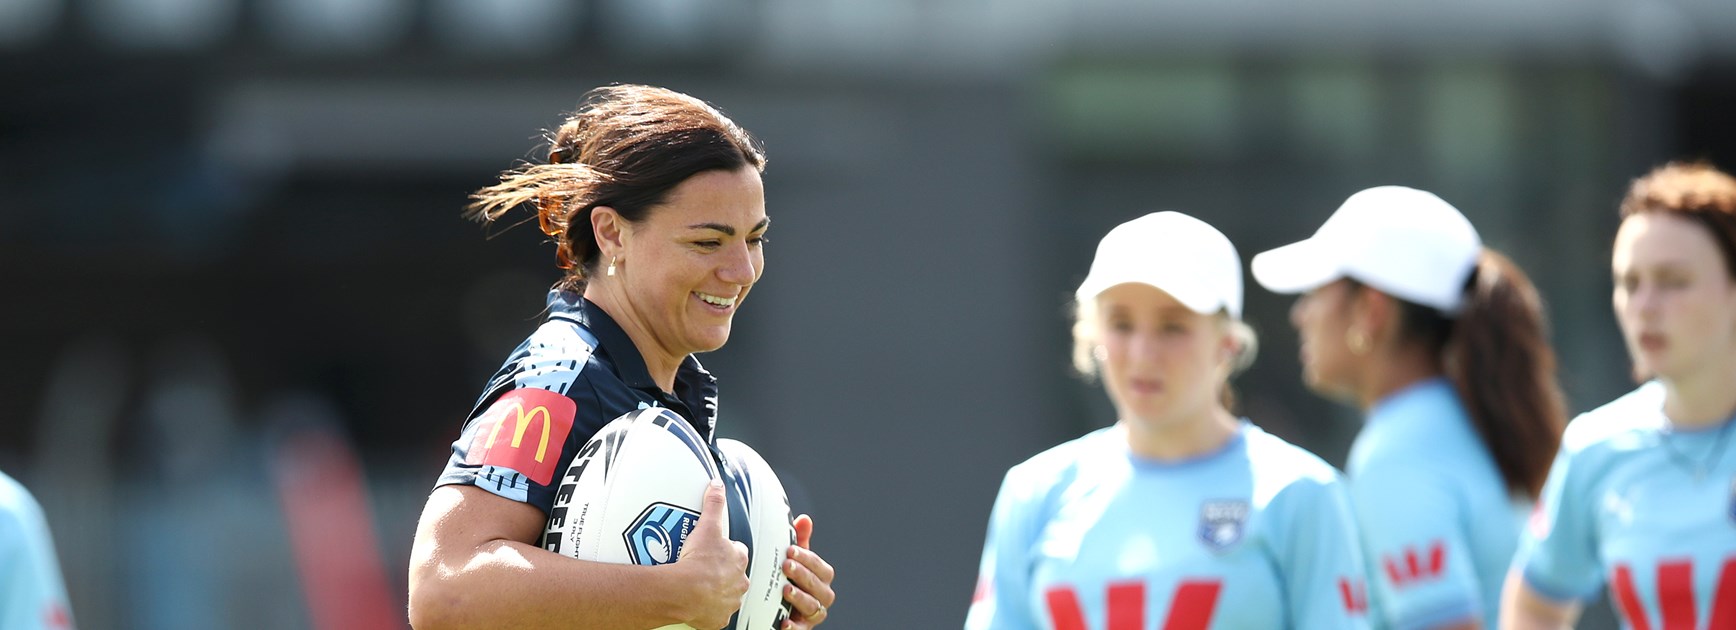 Boyle to tackle NSW Women's Premiership in 2023